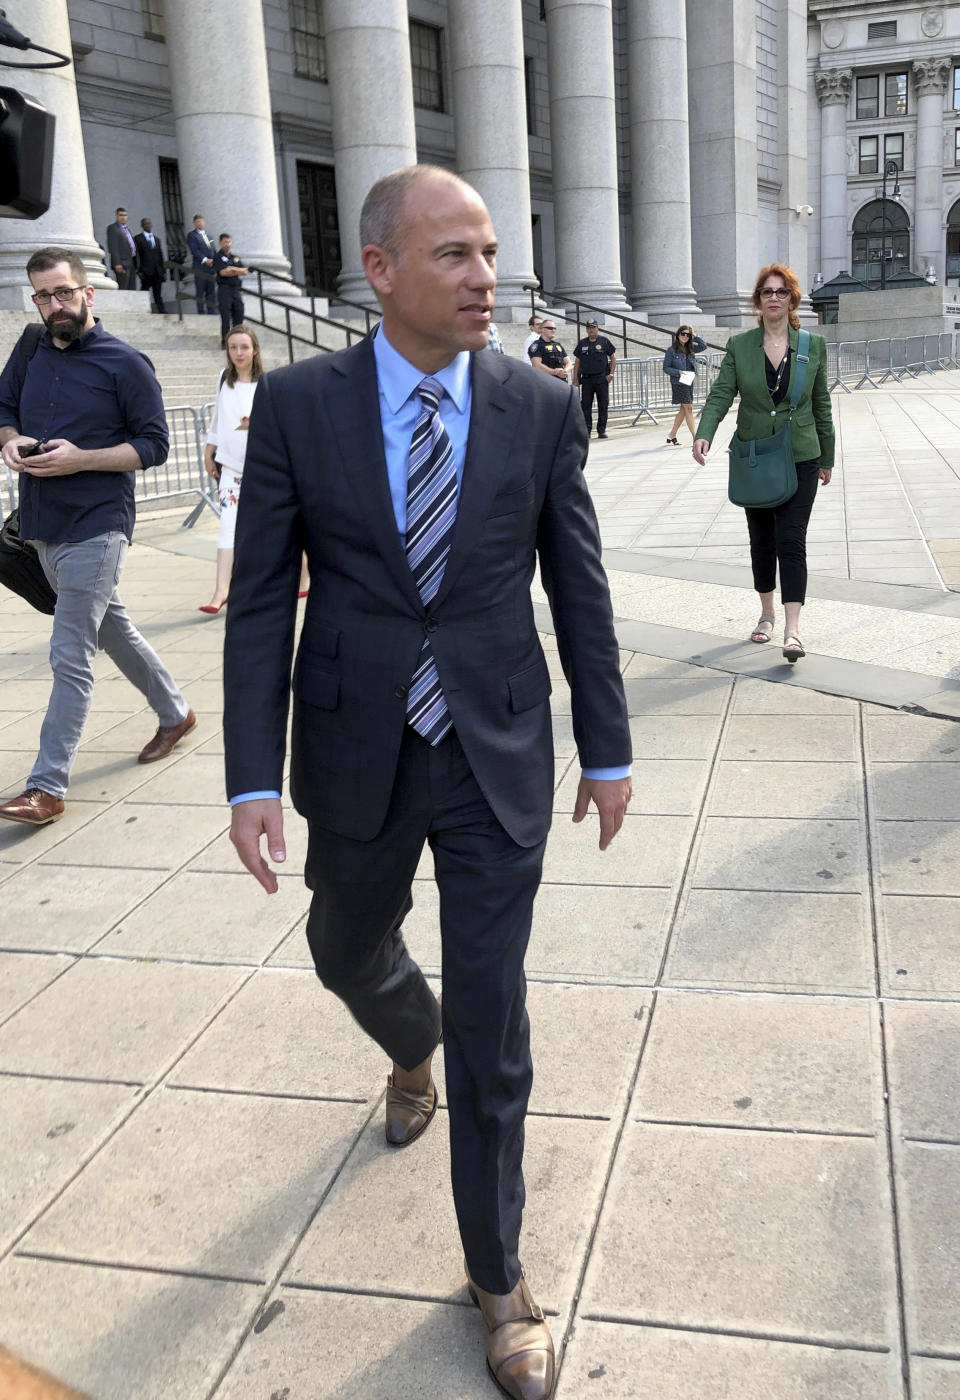 Attorney Michael Avenatti walks past the federal courthouse in New York after making an appearance related to the extortion charges against him, Thursday, Aug. 22, 2019. (AP Photo/Larry Neumeister)